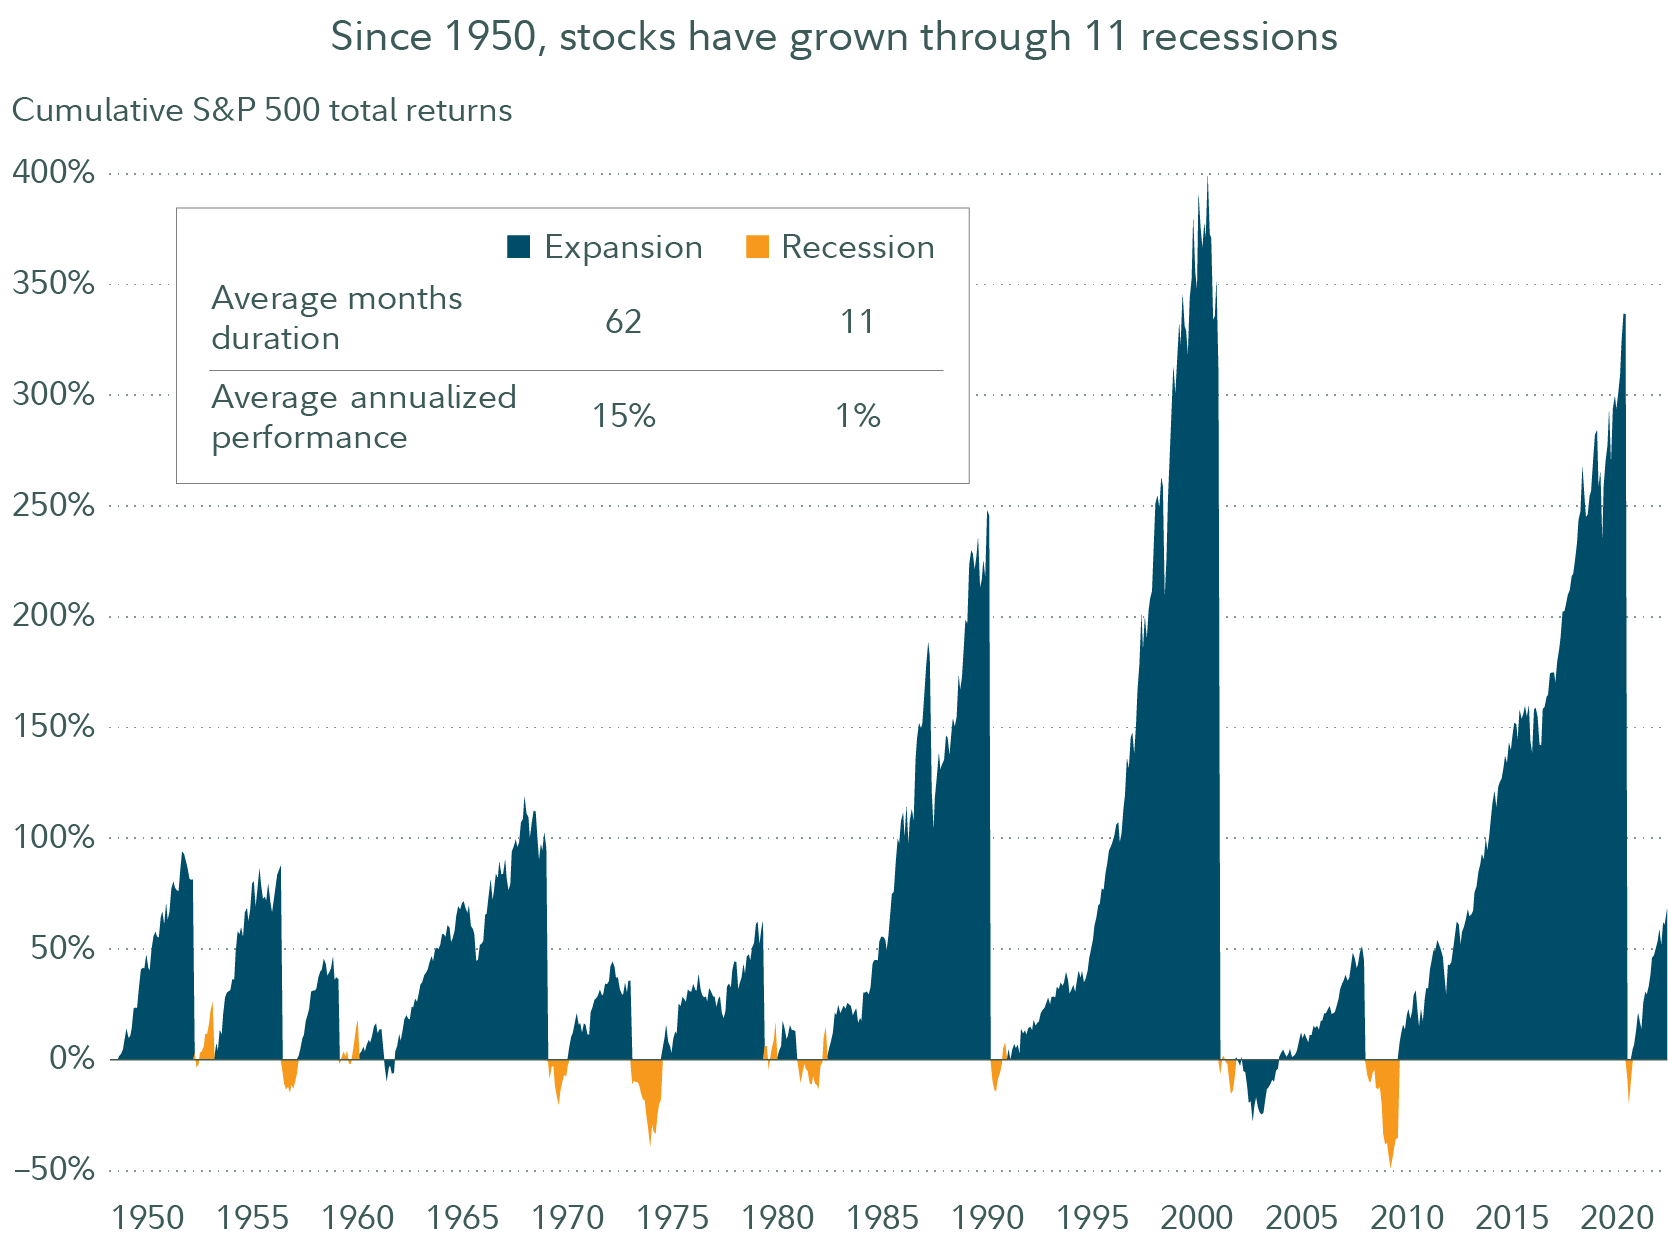 Market returns since 1950 on average have been positive, including dividends. Additionally, over this time span, the market has been in an expansionary period the vast majority of the time.